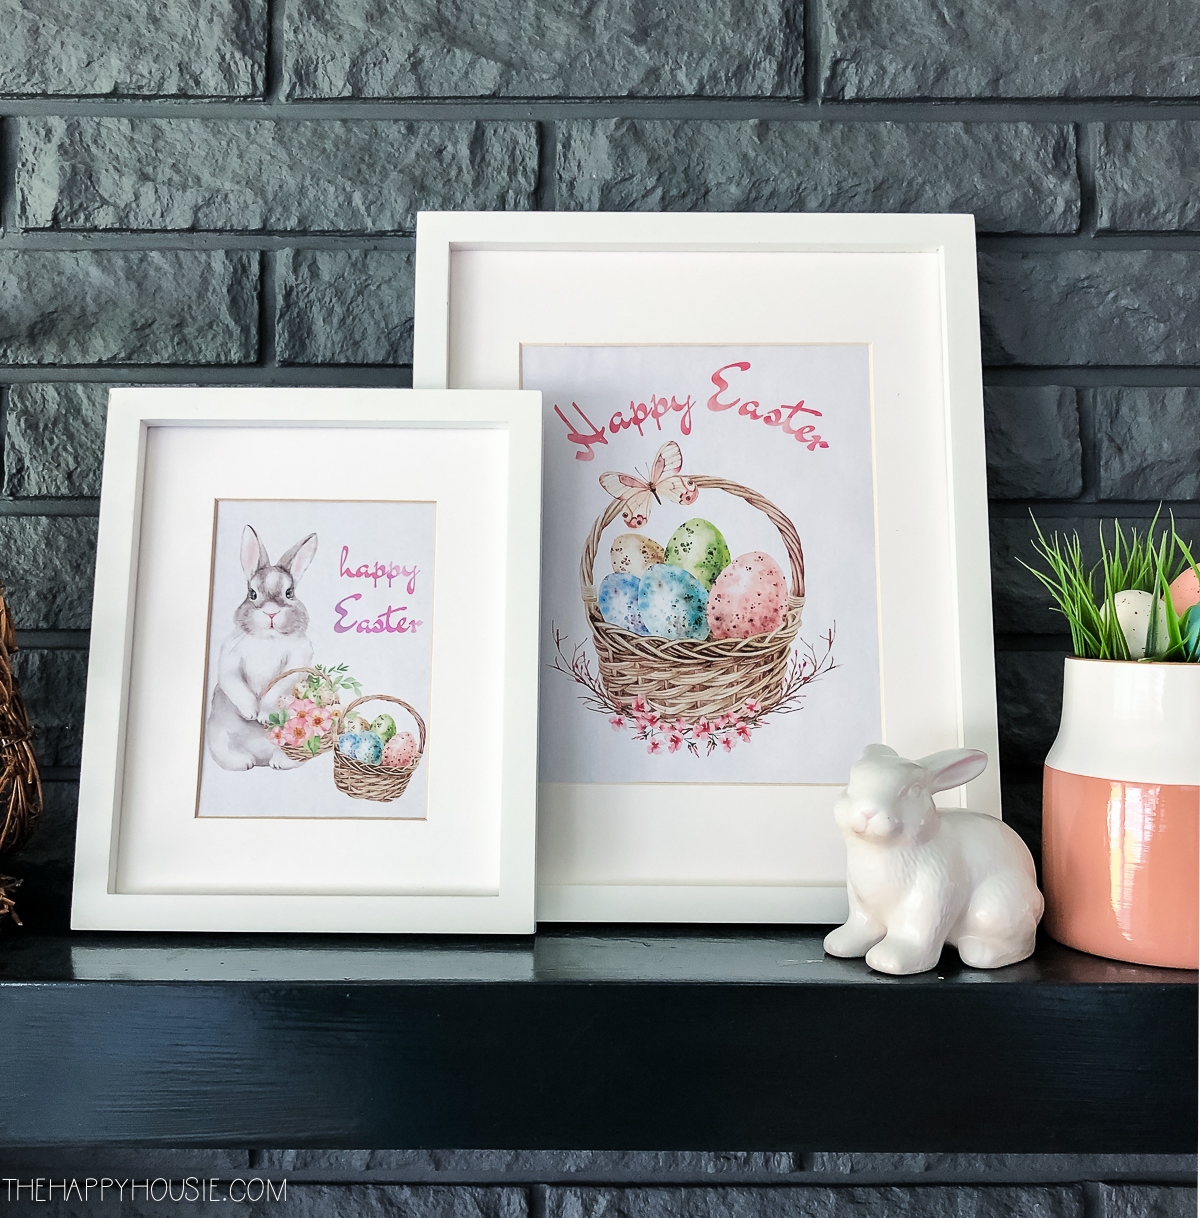 Printables that are on the shelf which are in white frames.